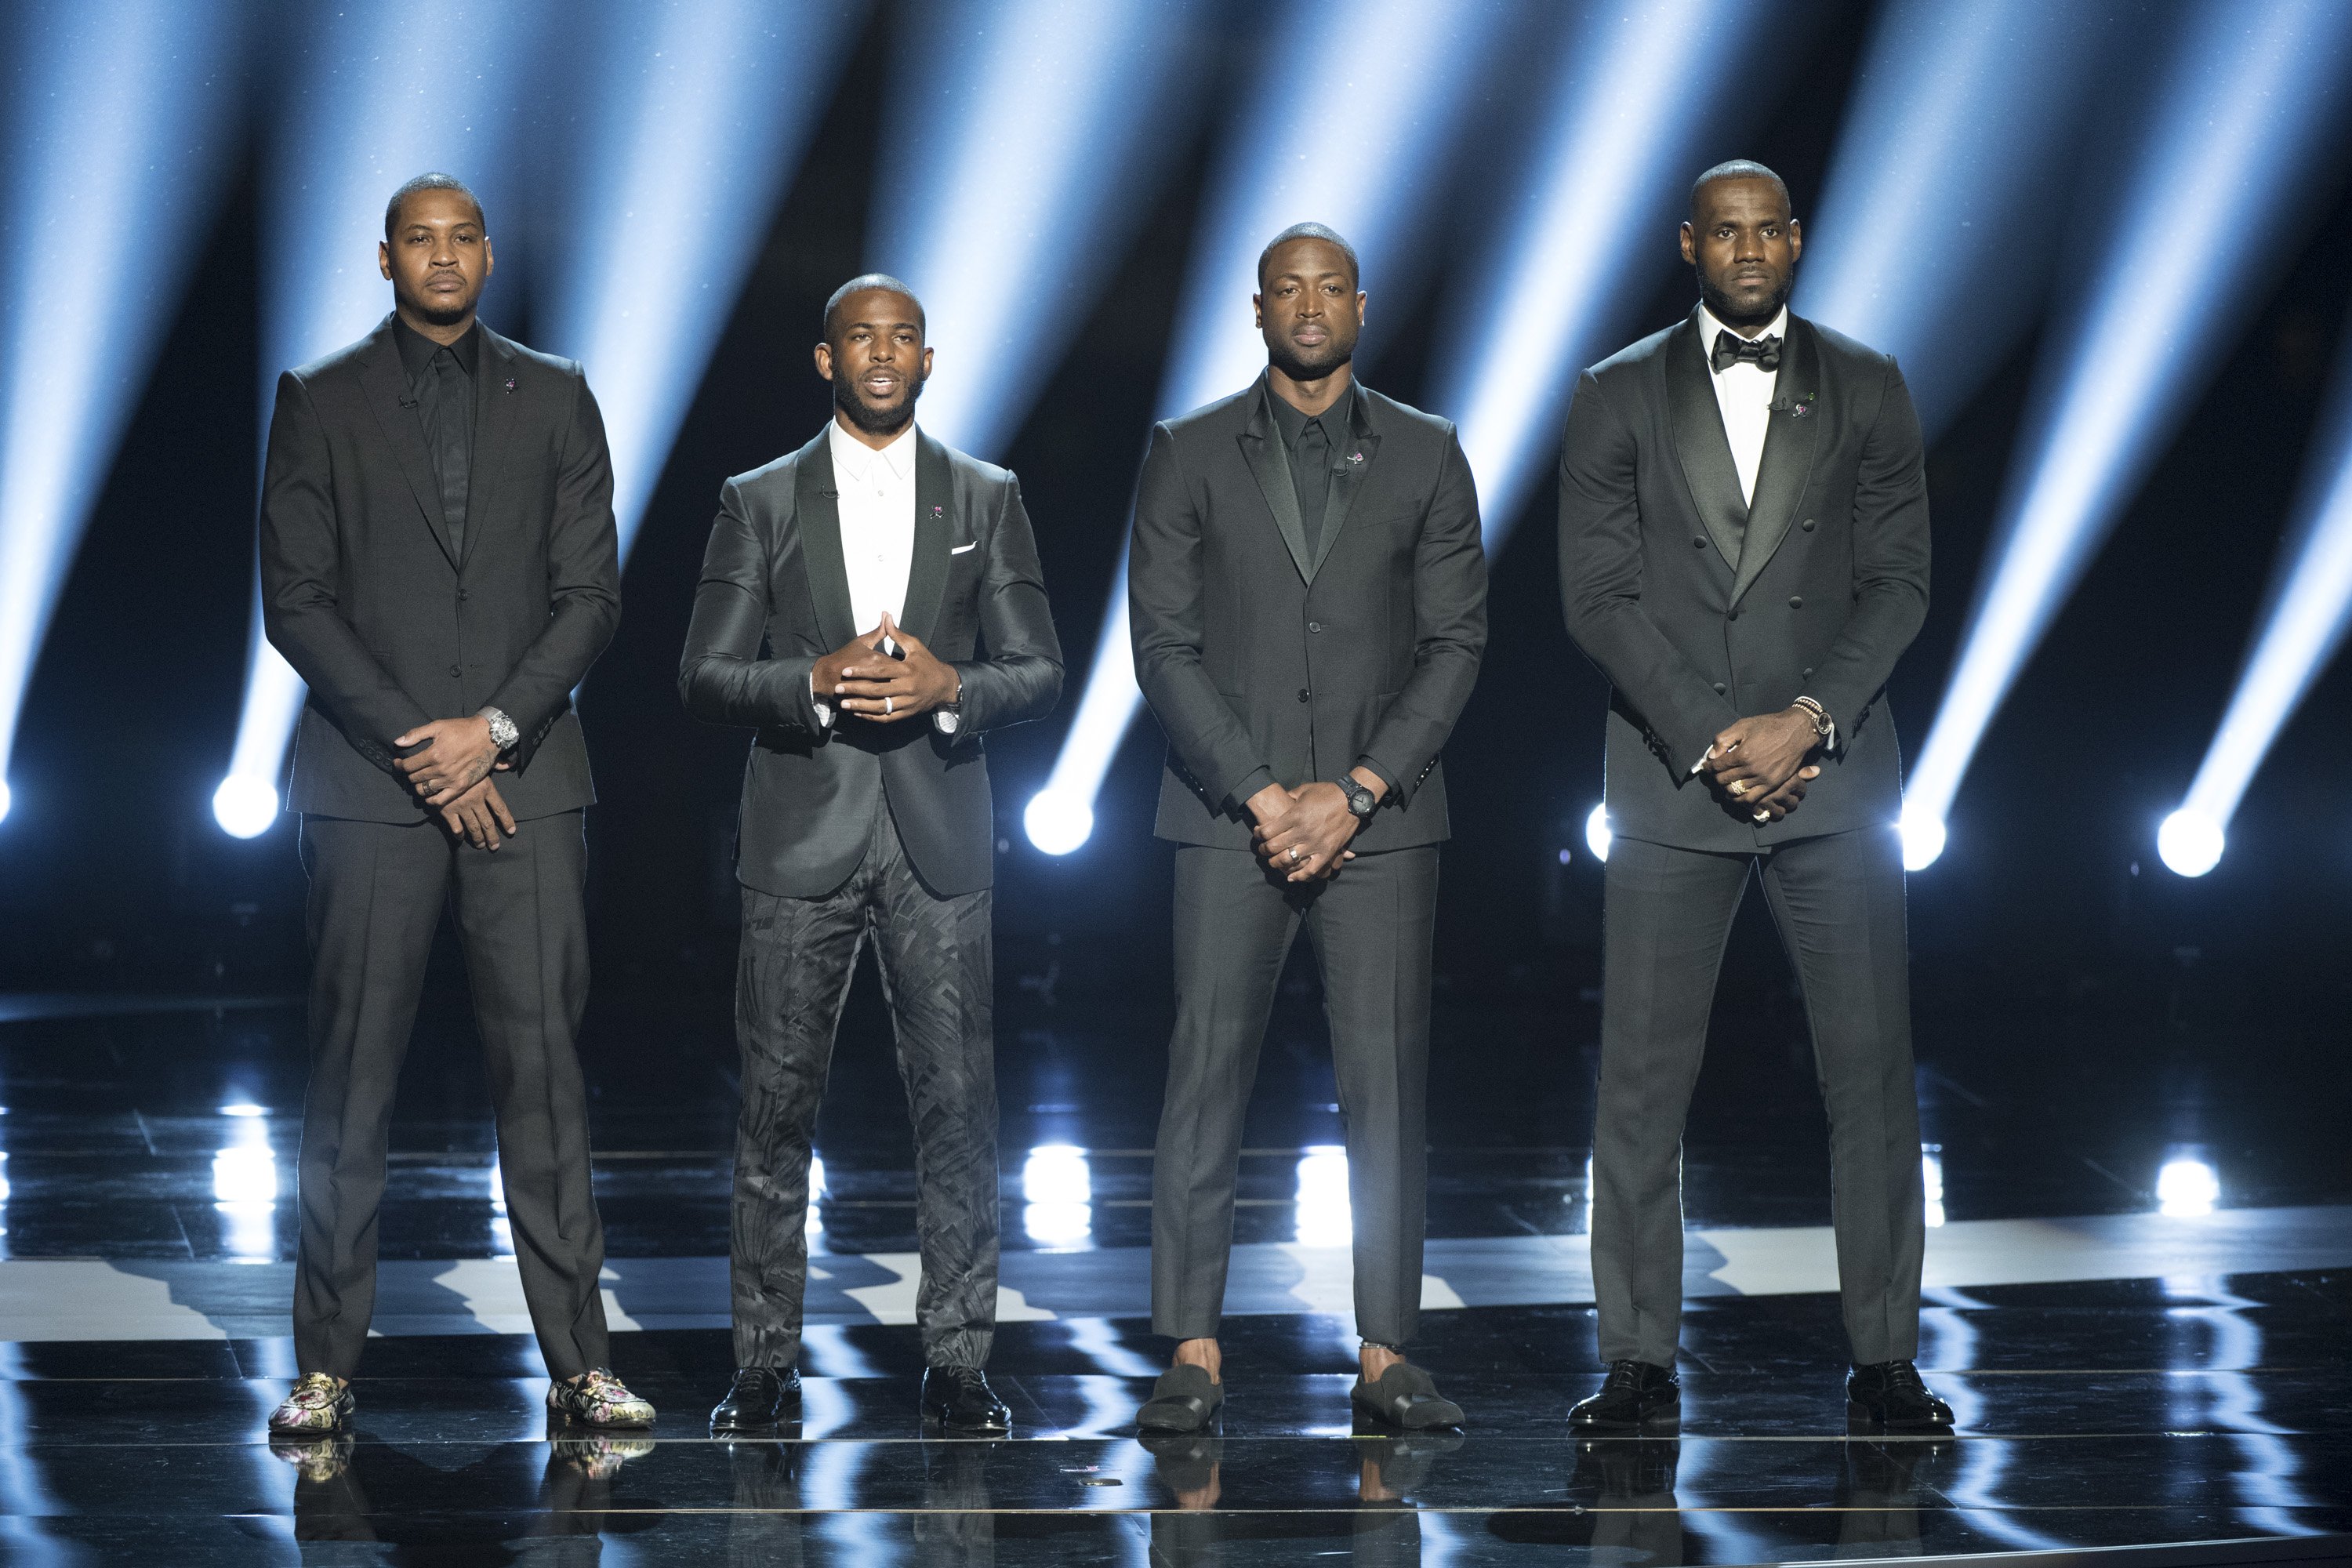 Carmelo Anthony, Dwyane Wade, Chris Paul, and LeBron James at the 2016 ESPYS on July 13, 2016. | Source: Getty Images